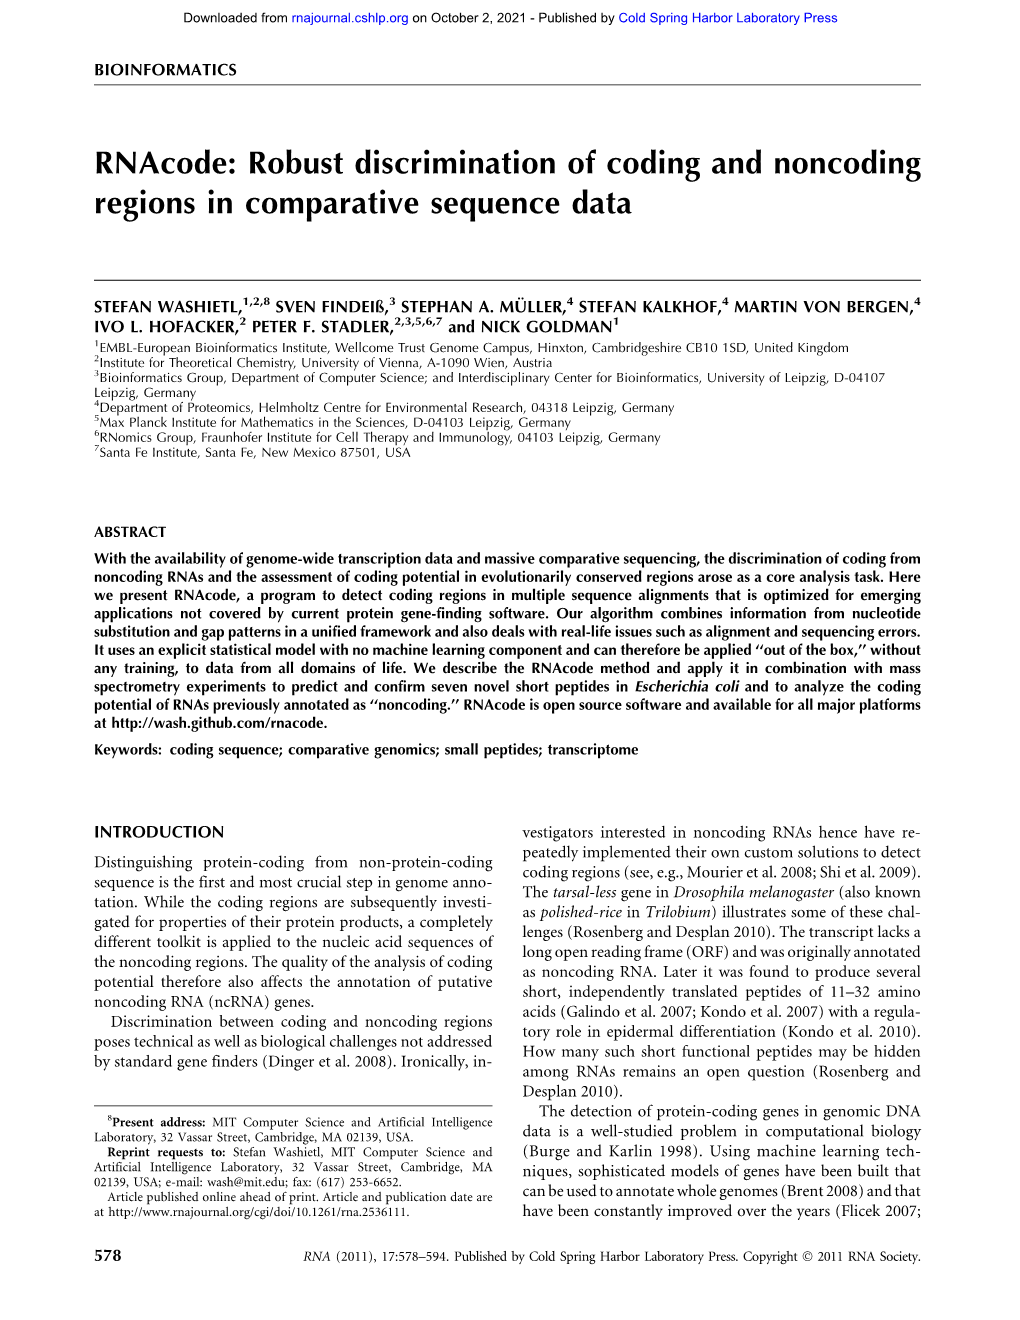 Robust Discrimination of Coding and Noncoding Regions in Comparative Sequence Data